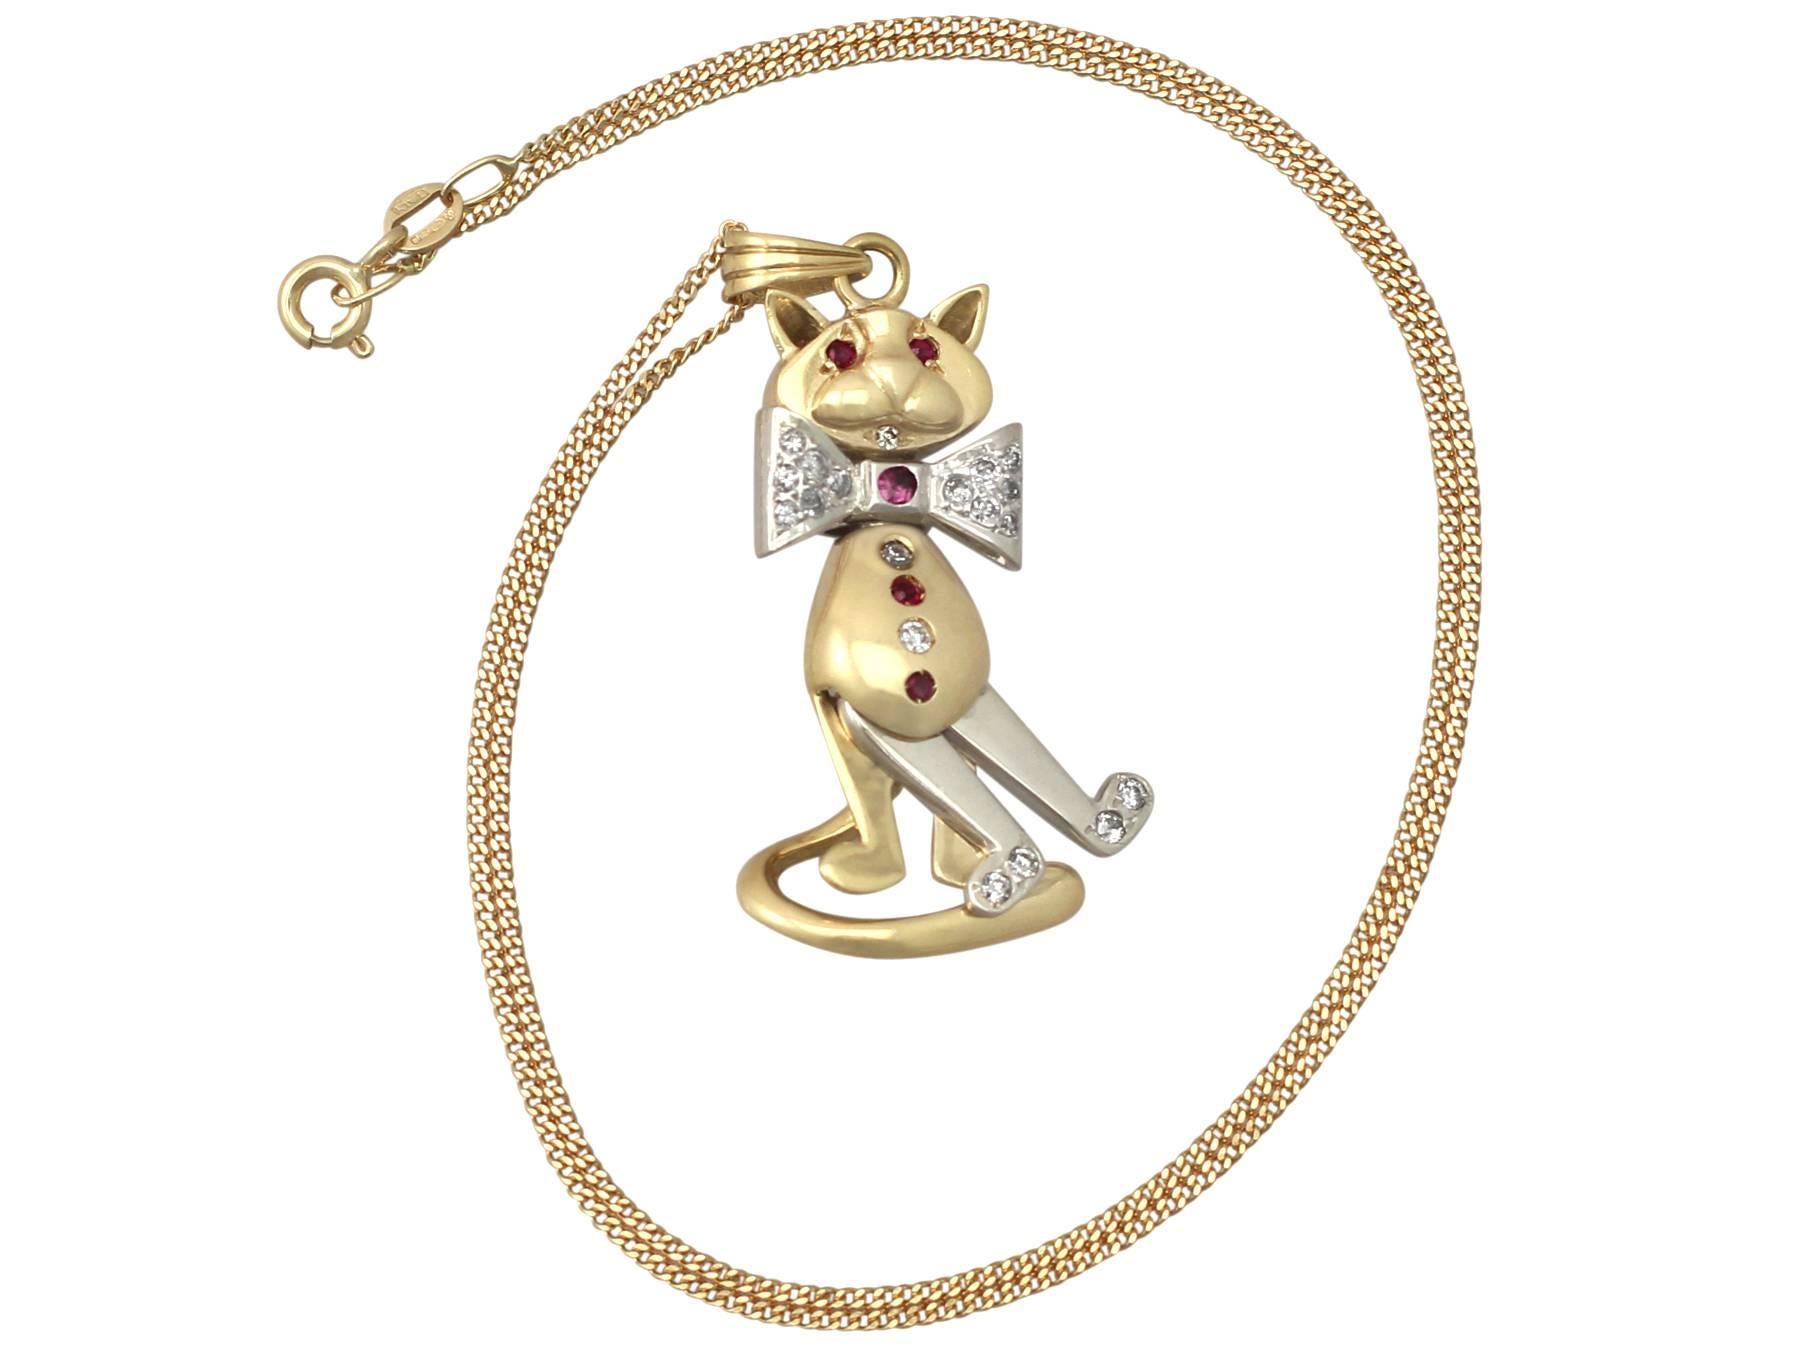 A fine and impressive vintage 0.39 carat diamond and 0.12 carat natural ruby, 18 karat yellow gold and 18 karat white gold cat pendant; part of our diverse vintage jewelry range

This fine and impressive vintage cat pendant has been crafted in 18k